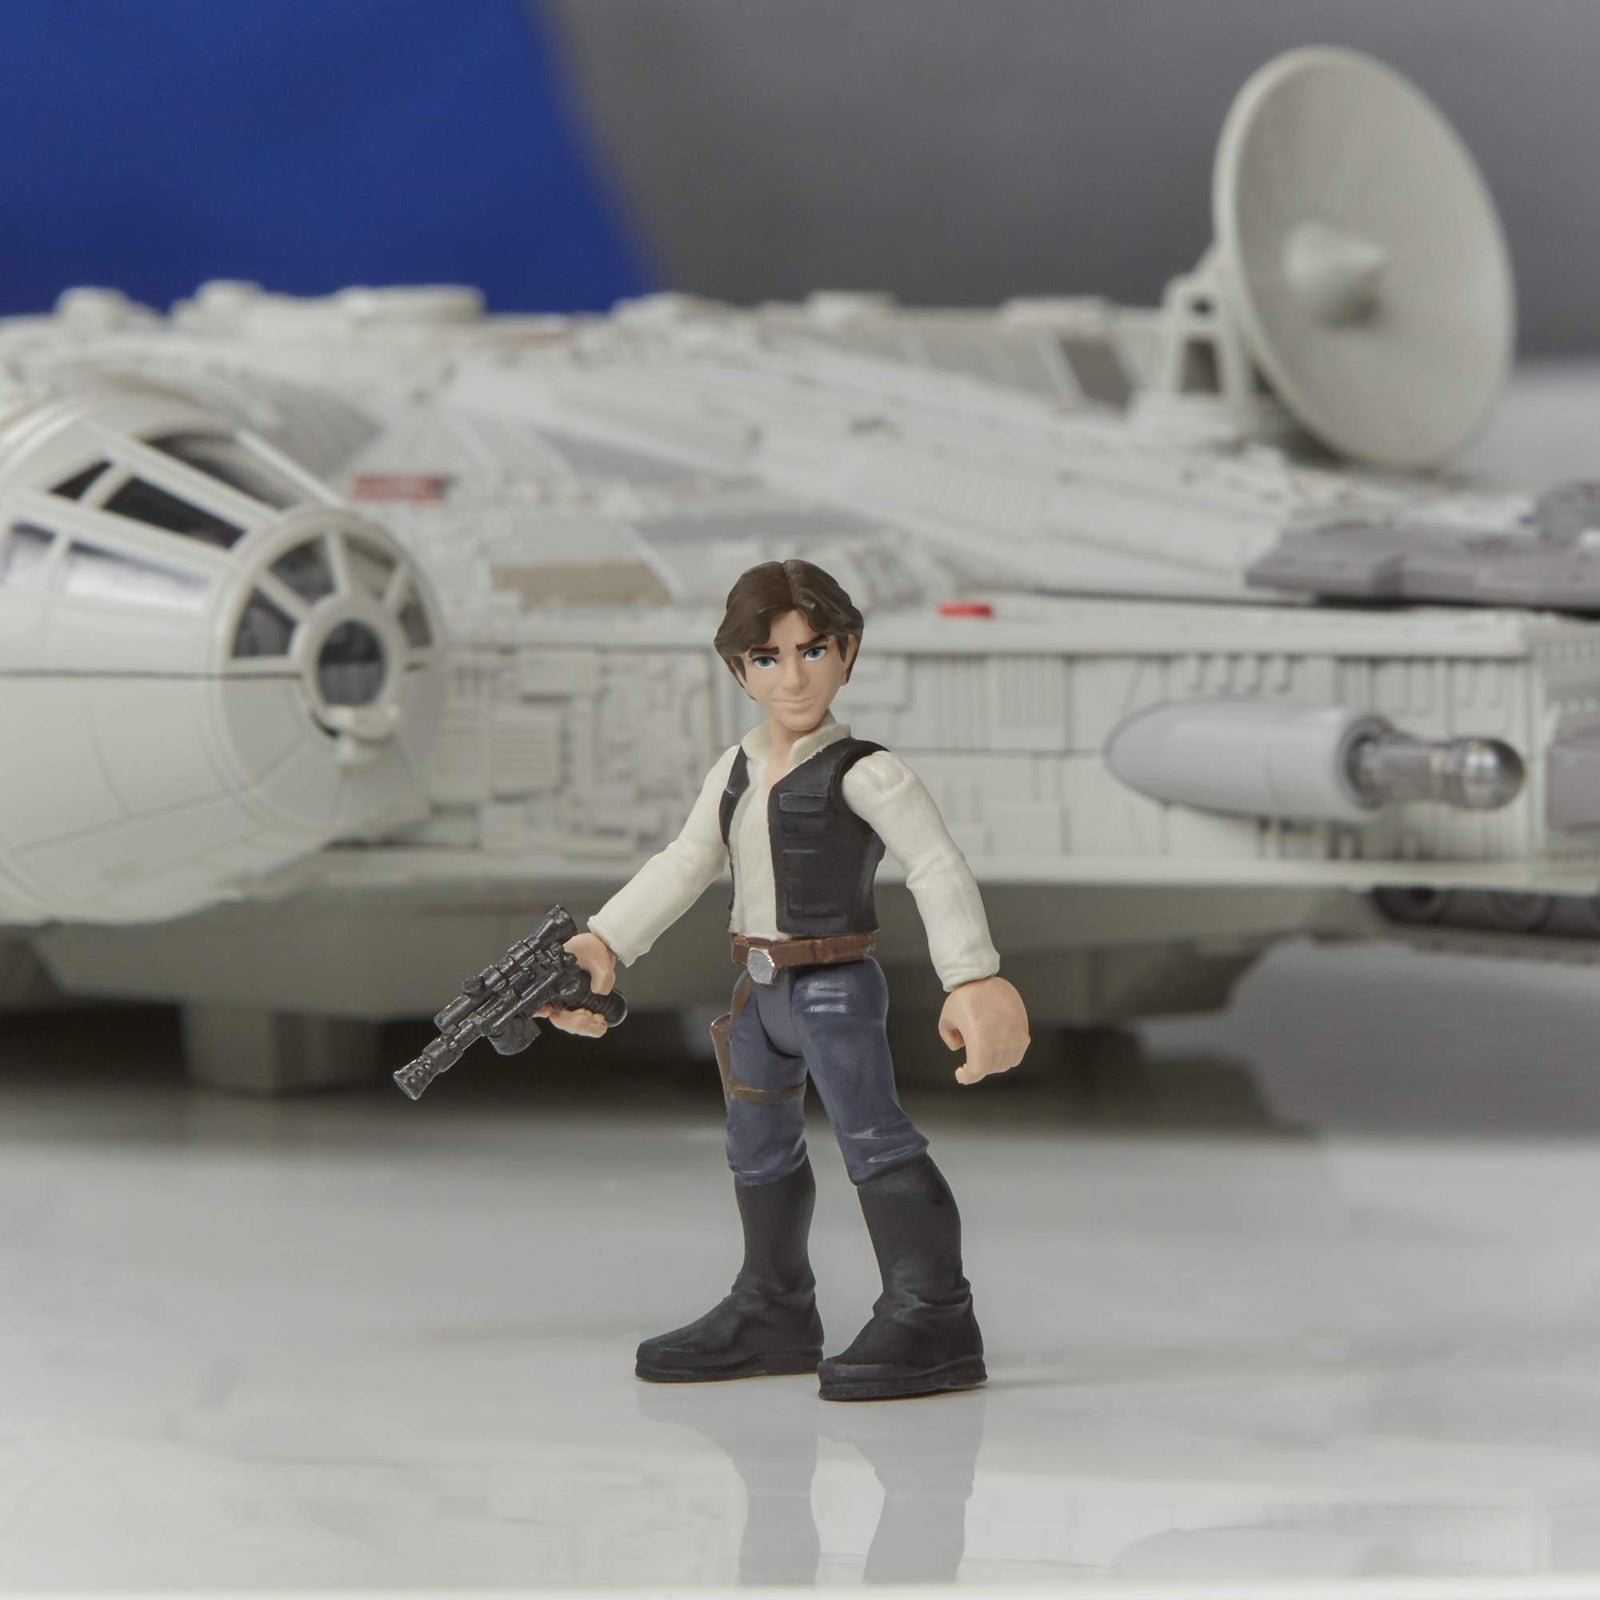 Star Wars Mission Fleet Han Solo Millennium Falcon 2.5-Inch-Scale Figure and Vehicle, Toys for Kids Ages 4 and Up